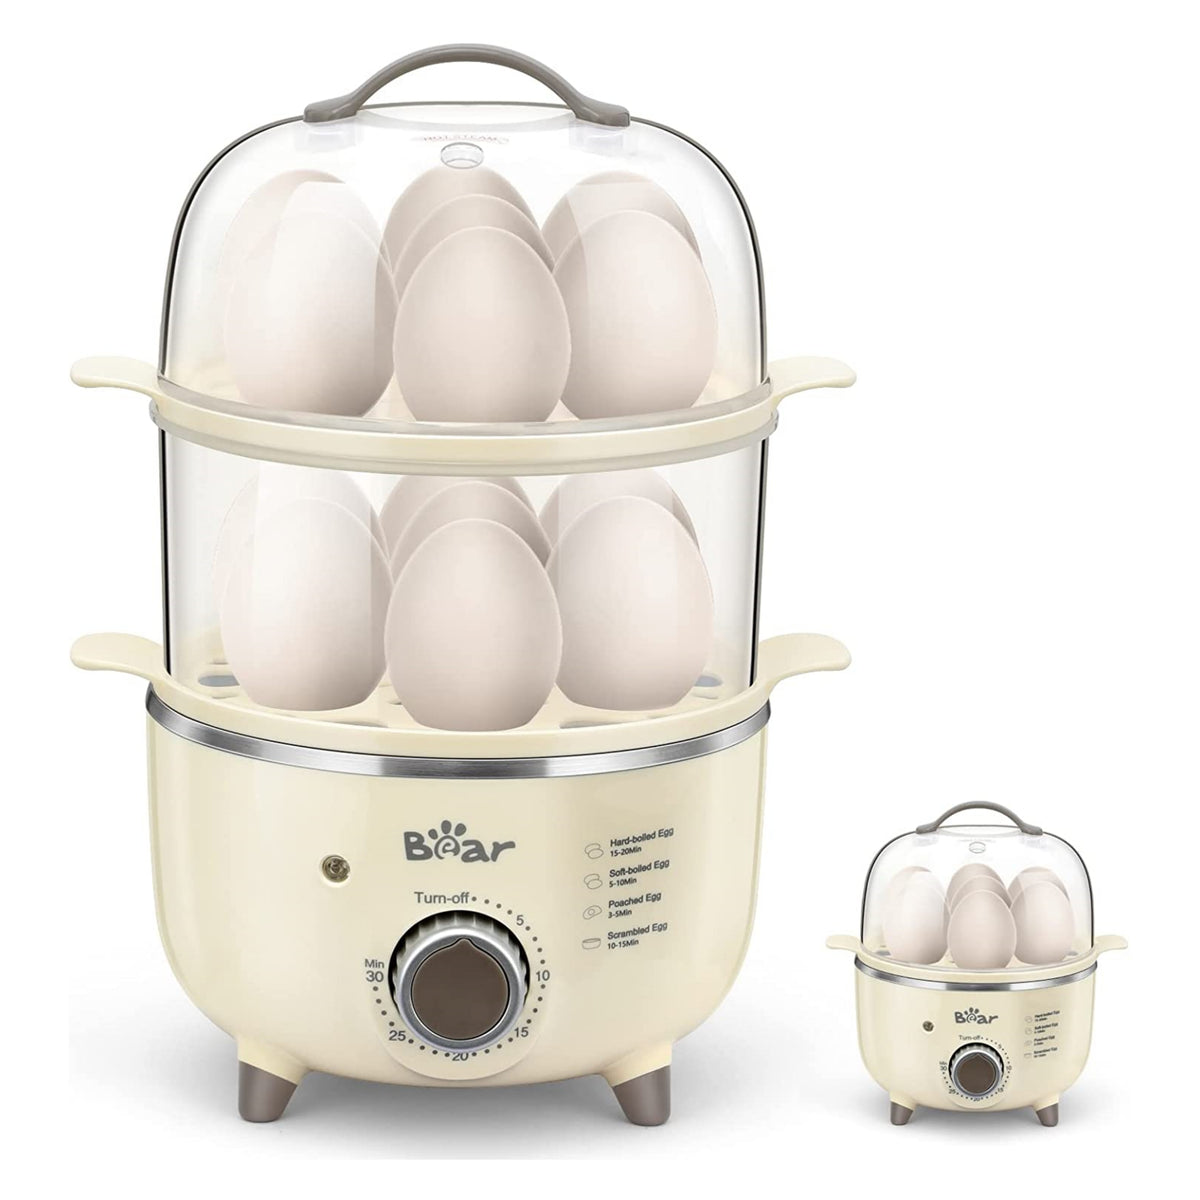 10 Capacity, Egg Cooker For Hard Boiled, Poached, Scrambled Eggs, Omelets,  Steamed Vegetables, & More, With Auto Shut Off Feature